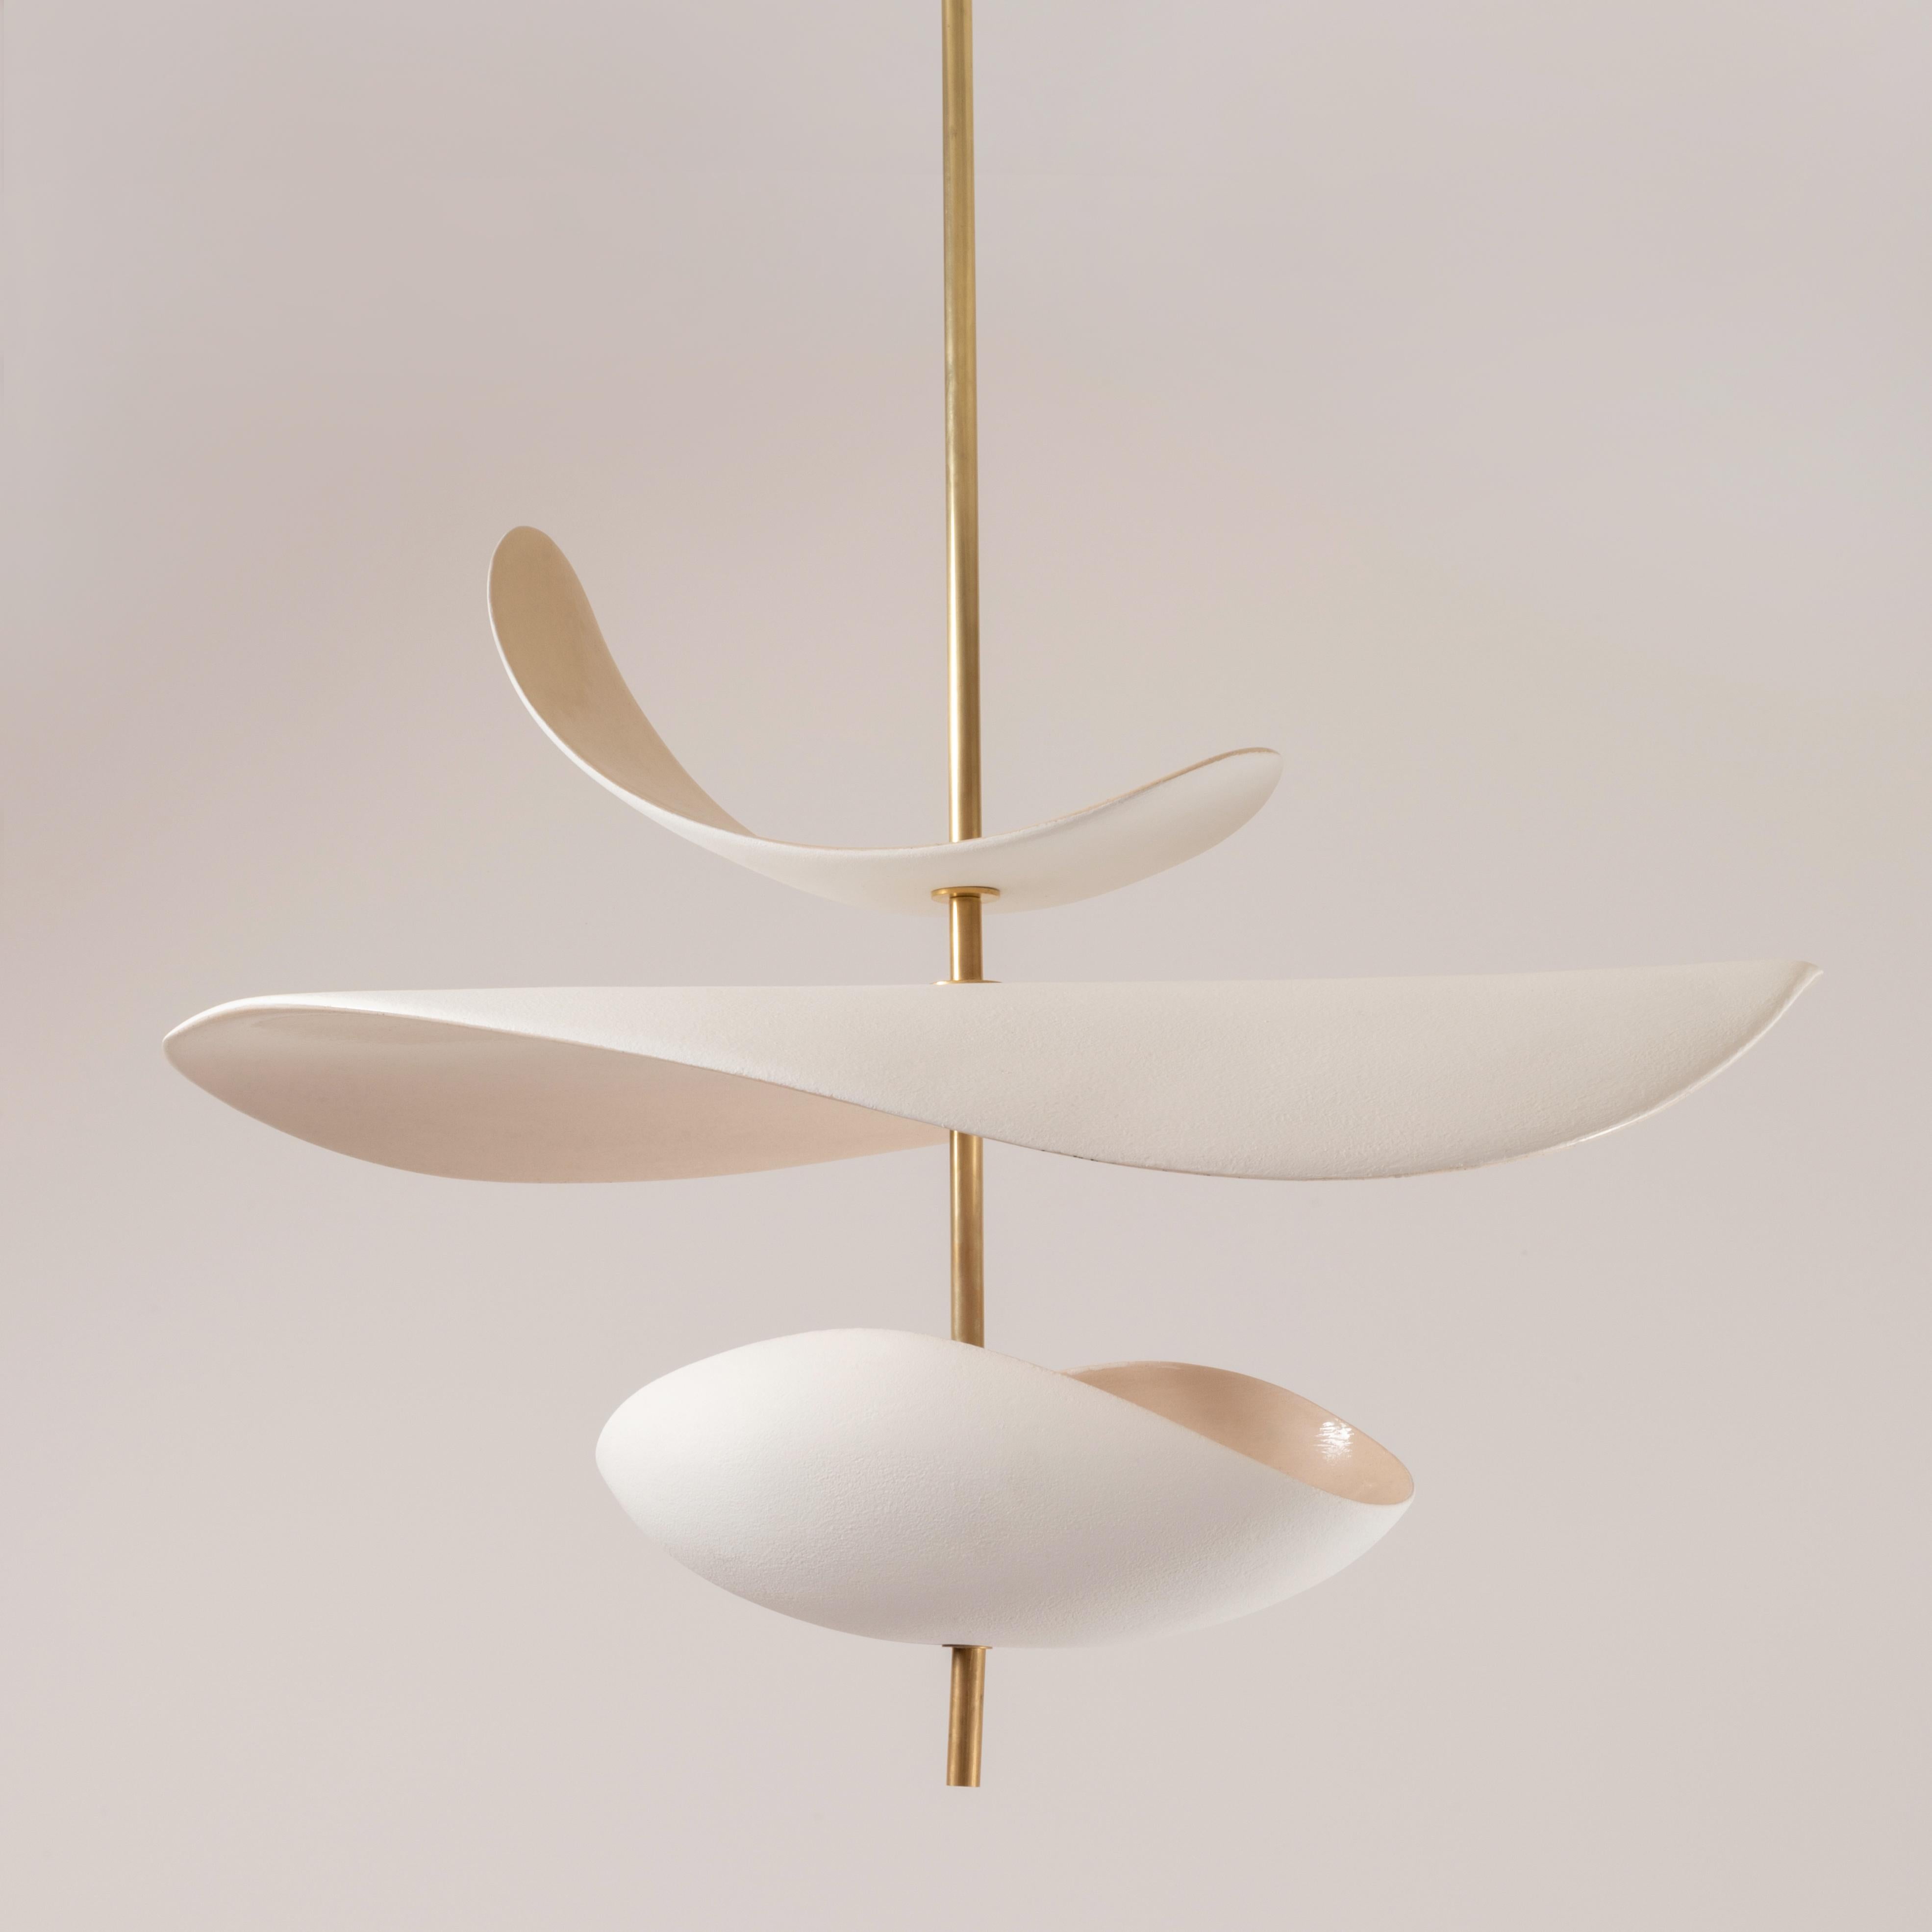 Antigone Pendant Lamp by Elsa Foulon
Standard size.
Dimensions: D 55-60 cm.
Materials: ceramic, brass.
Unique Piece
Also available in different options: bowl or cup (lower part).
The height is min 65 cm and customizable to the customer's size. 

All